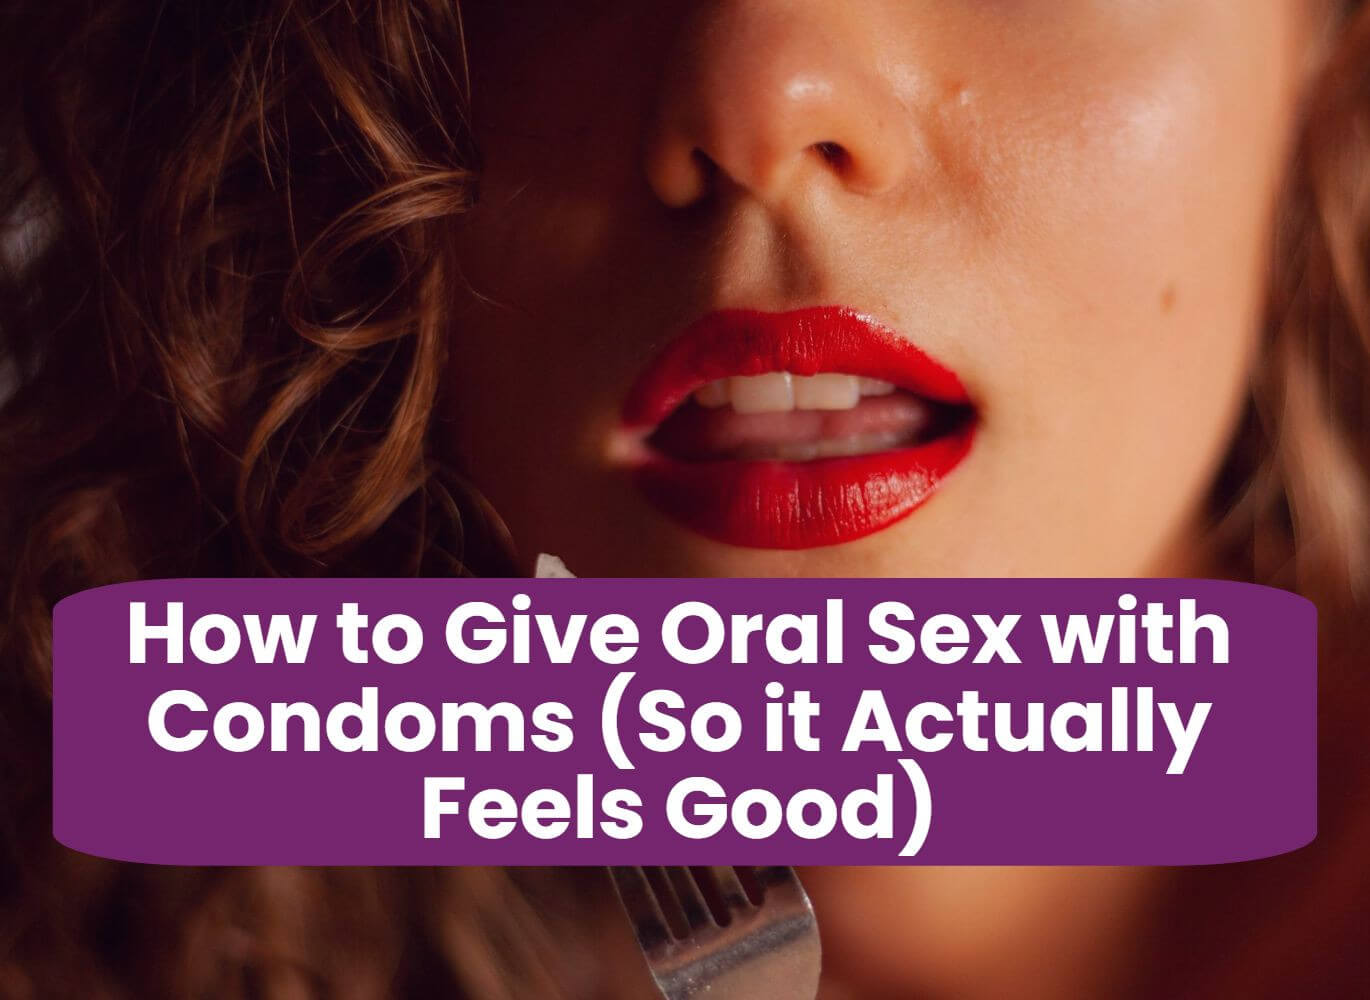 How to Give Oral Sex with Condoms (So it Actually Feels Good)